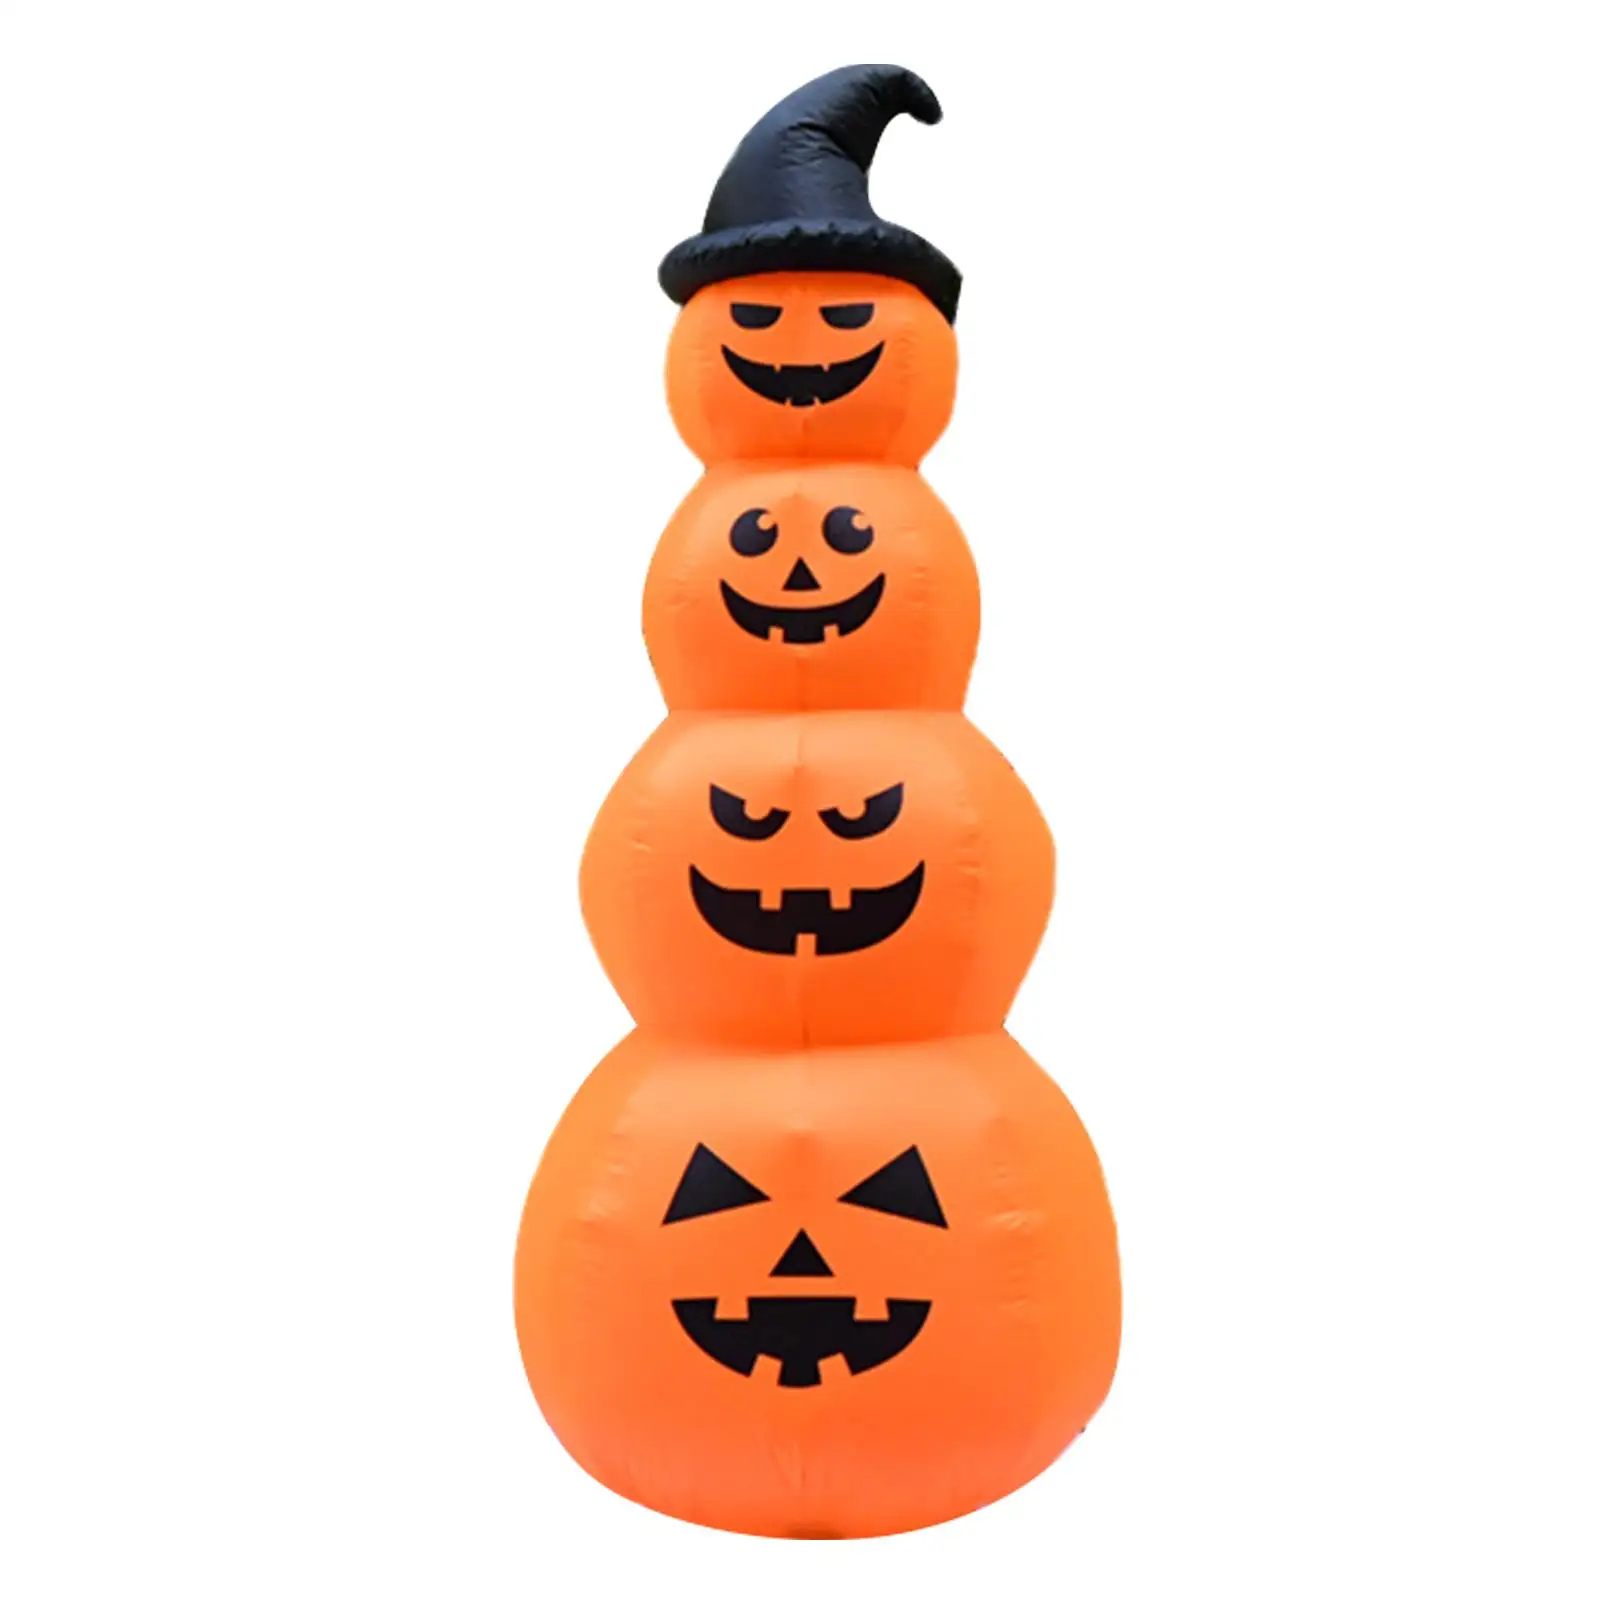 

7ft Tall LED Halloween Practical wearing Witch Hats Halloween Inflatable Pumpkin for Front Yard Porch Holiday Decorations